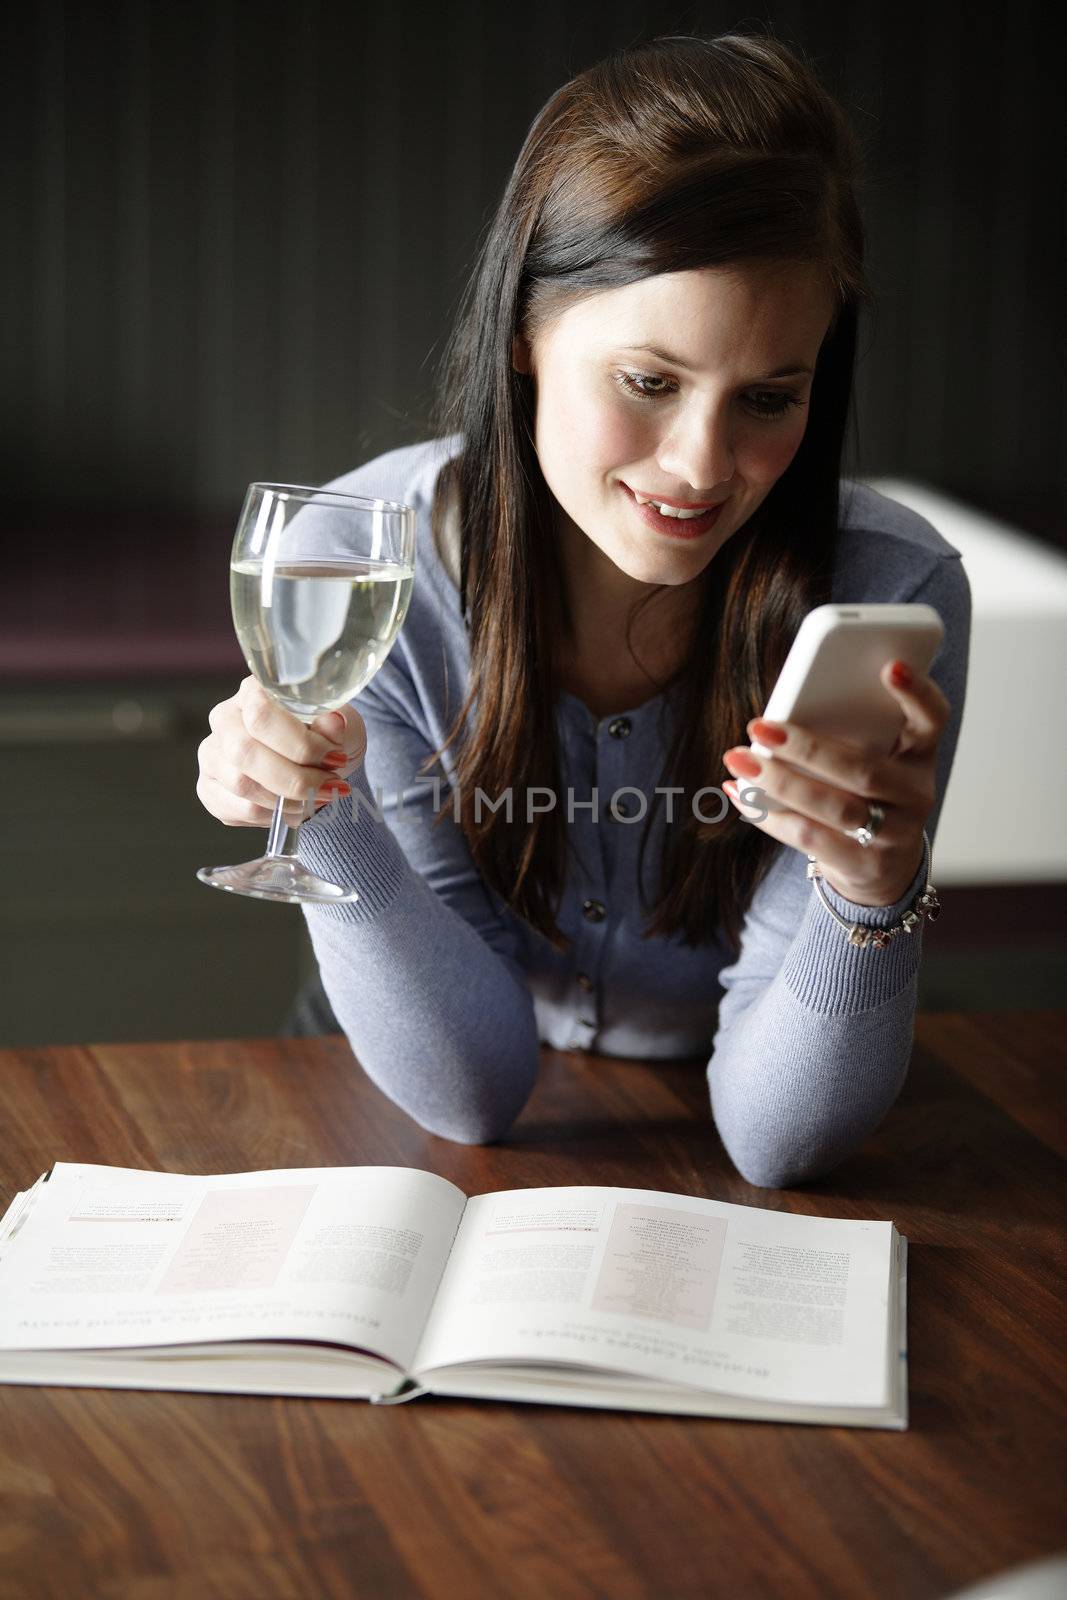 Attractive young woman enjoying a glass of wine in her kitchen while texting on the phone.